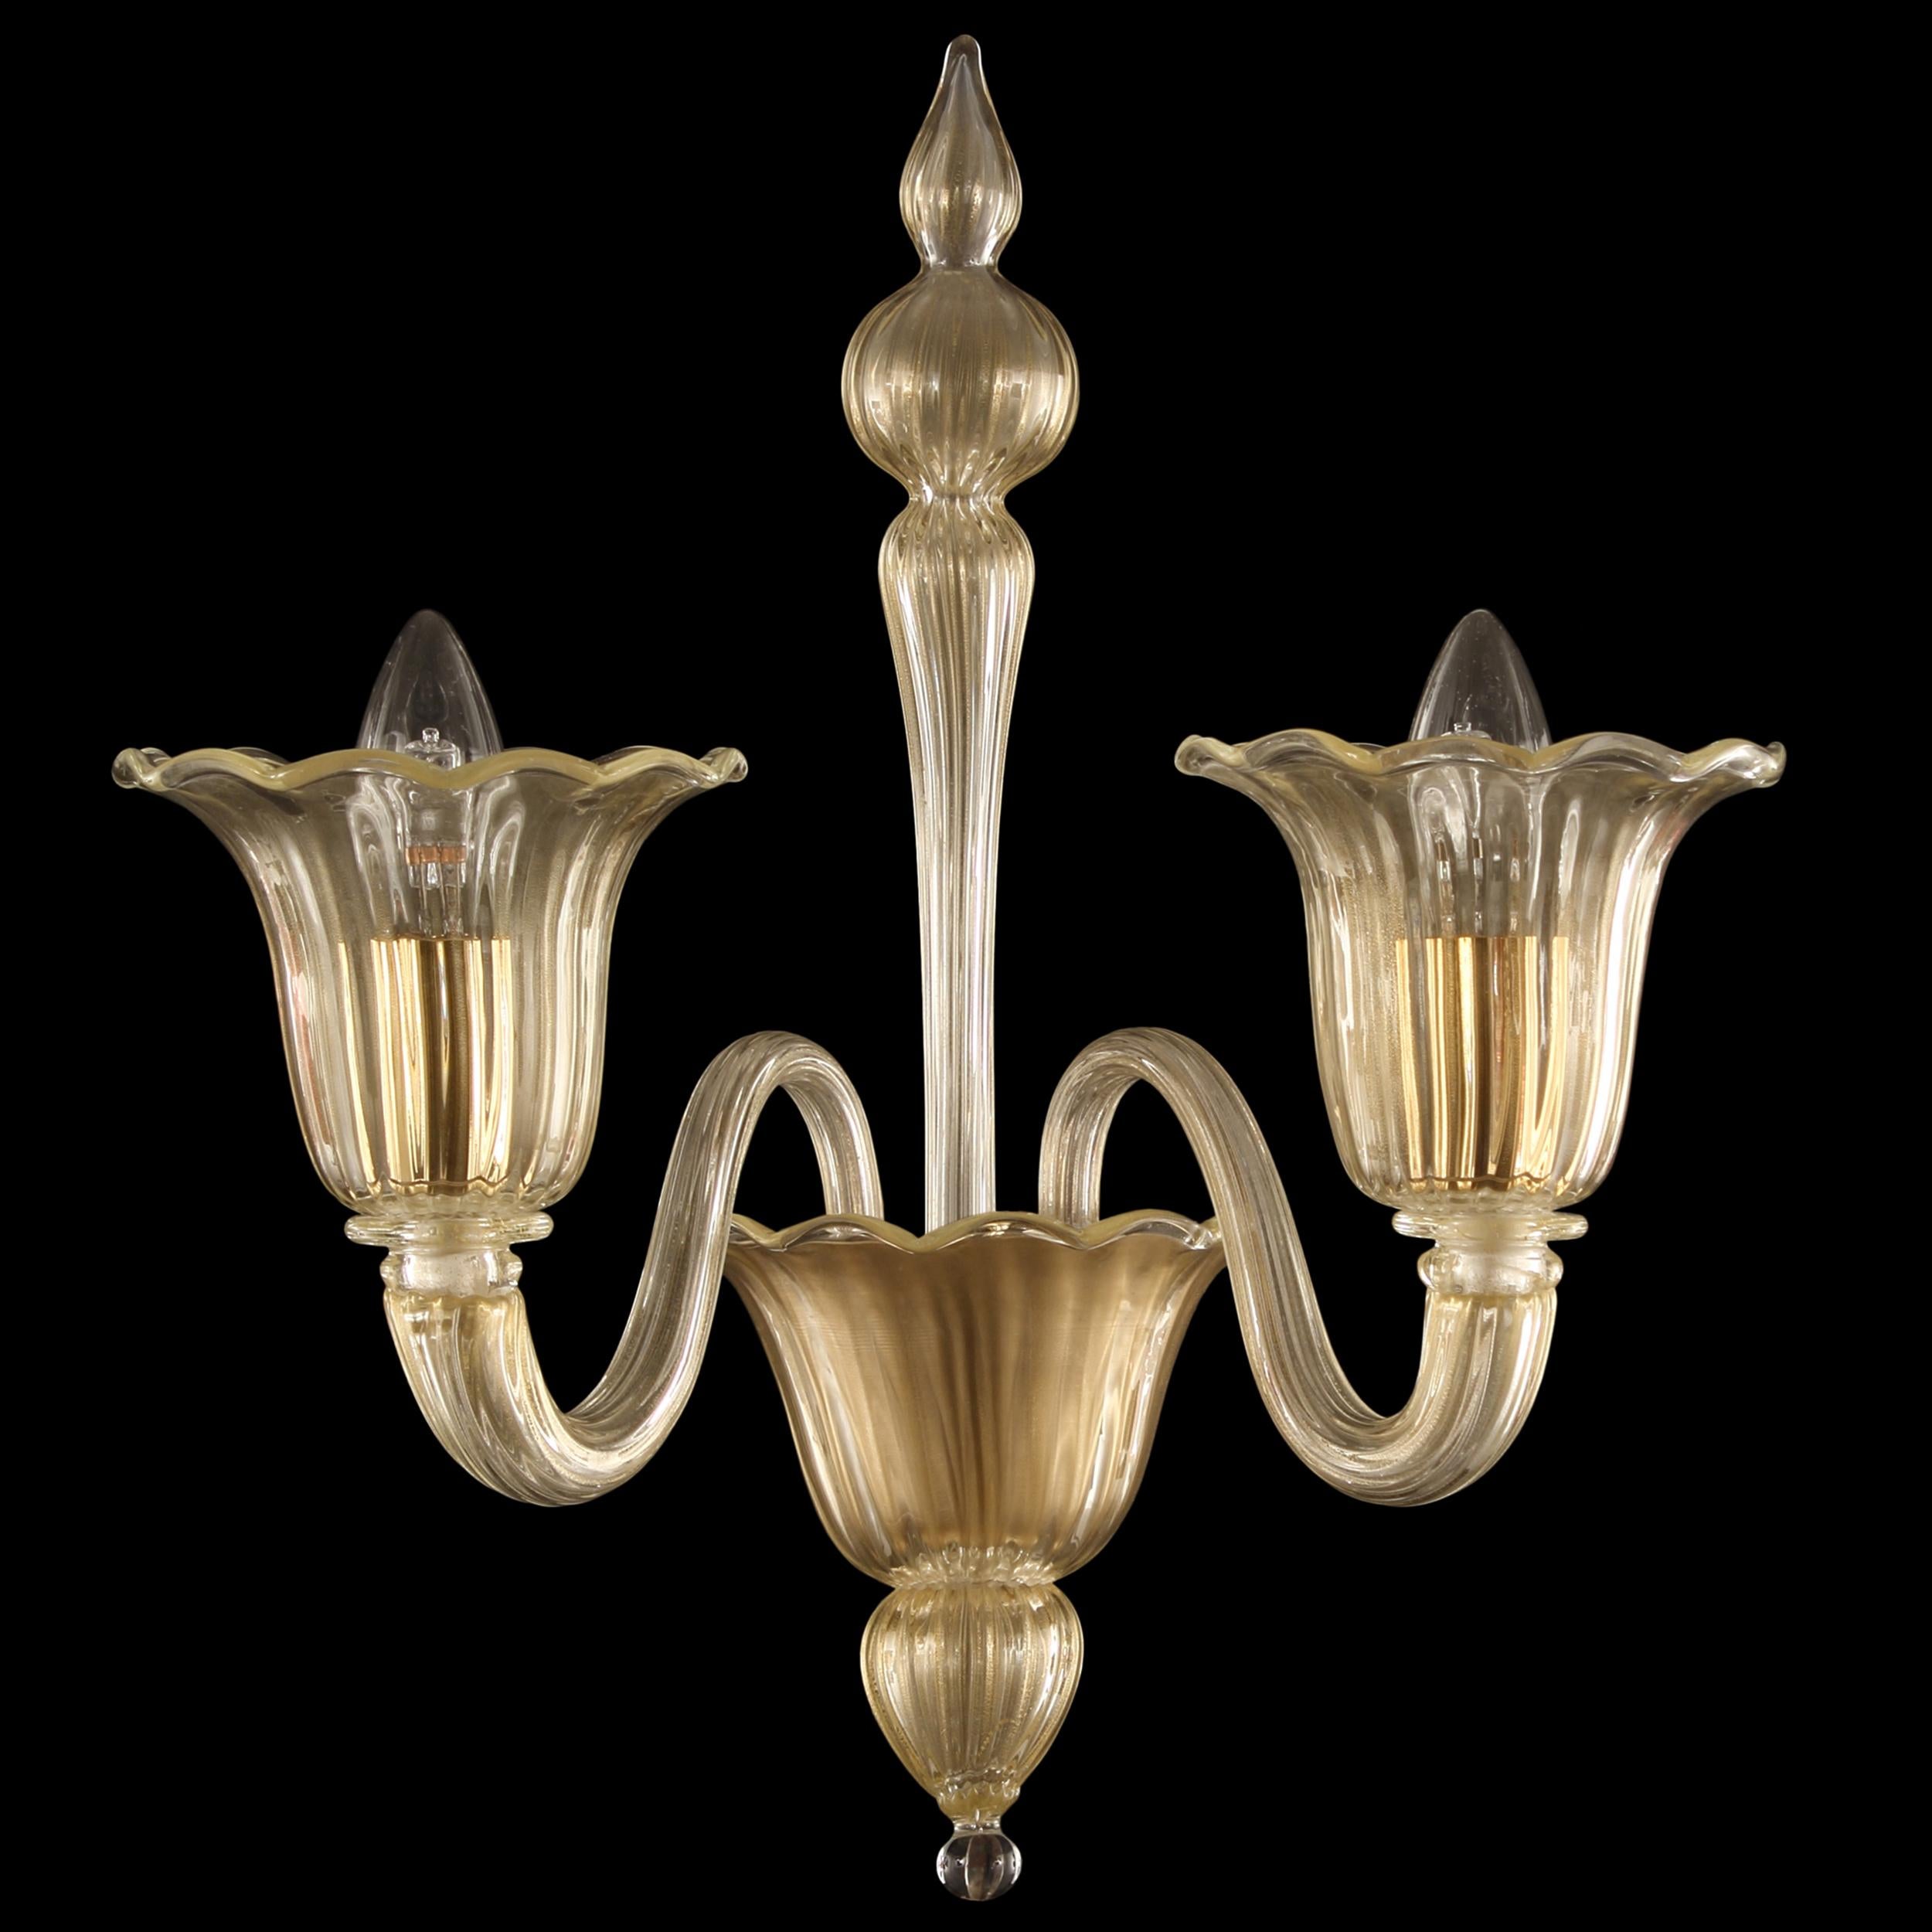 Bellepoque sconce 2 lights, golden leaf Murano glass upward light by Multiforme.
Bellepoque 364 from the Timeless collection is a collection that evokes the atmosphere of the beginning of the 19th century. The cups recall floral elements, thus